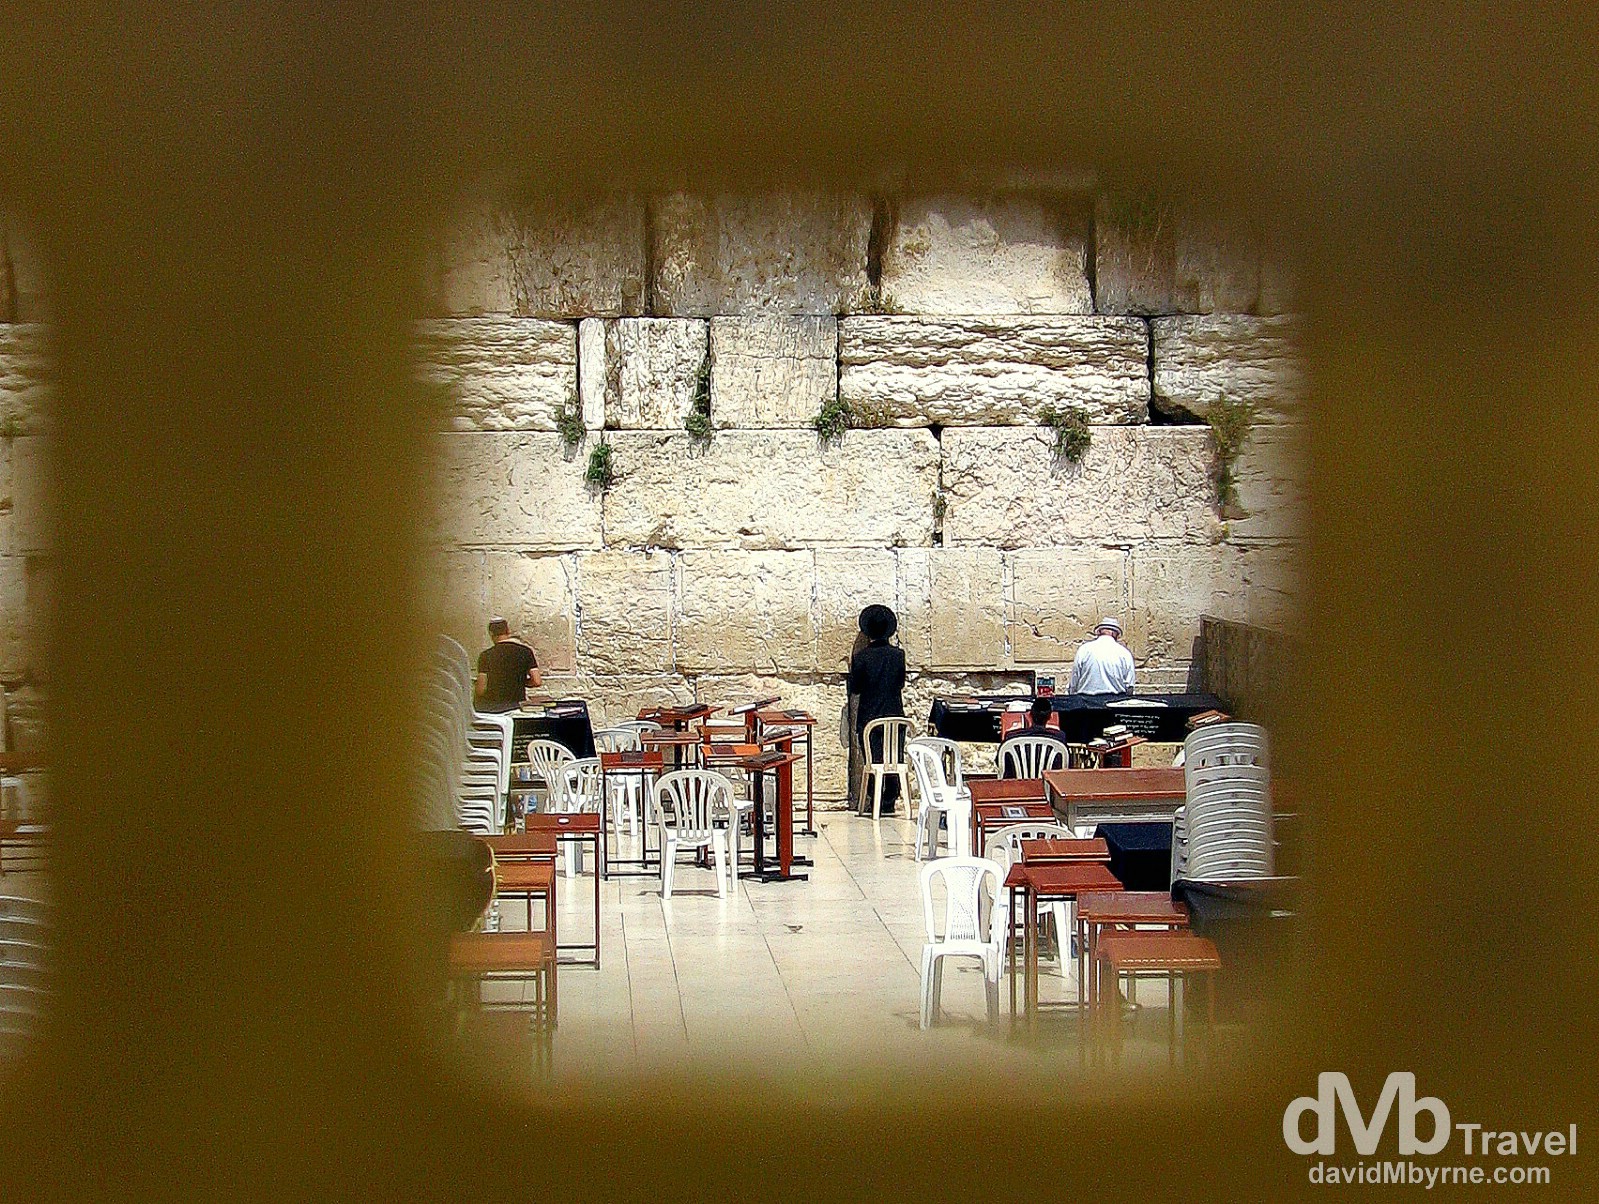 Activity at the Western / Wailing Wall in the Old City of Jerusalem, Israel. May 2, 2008.